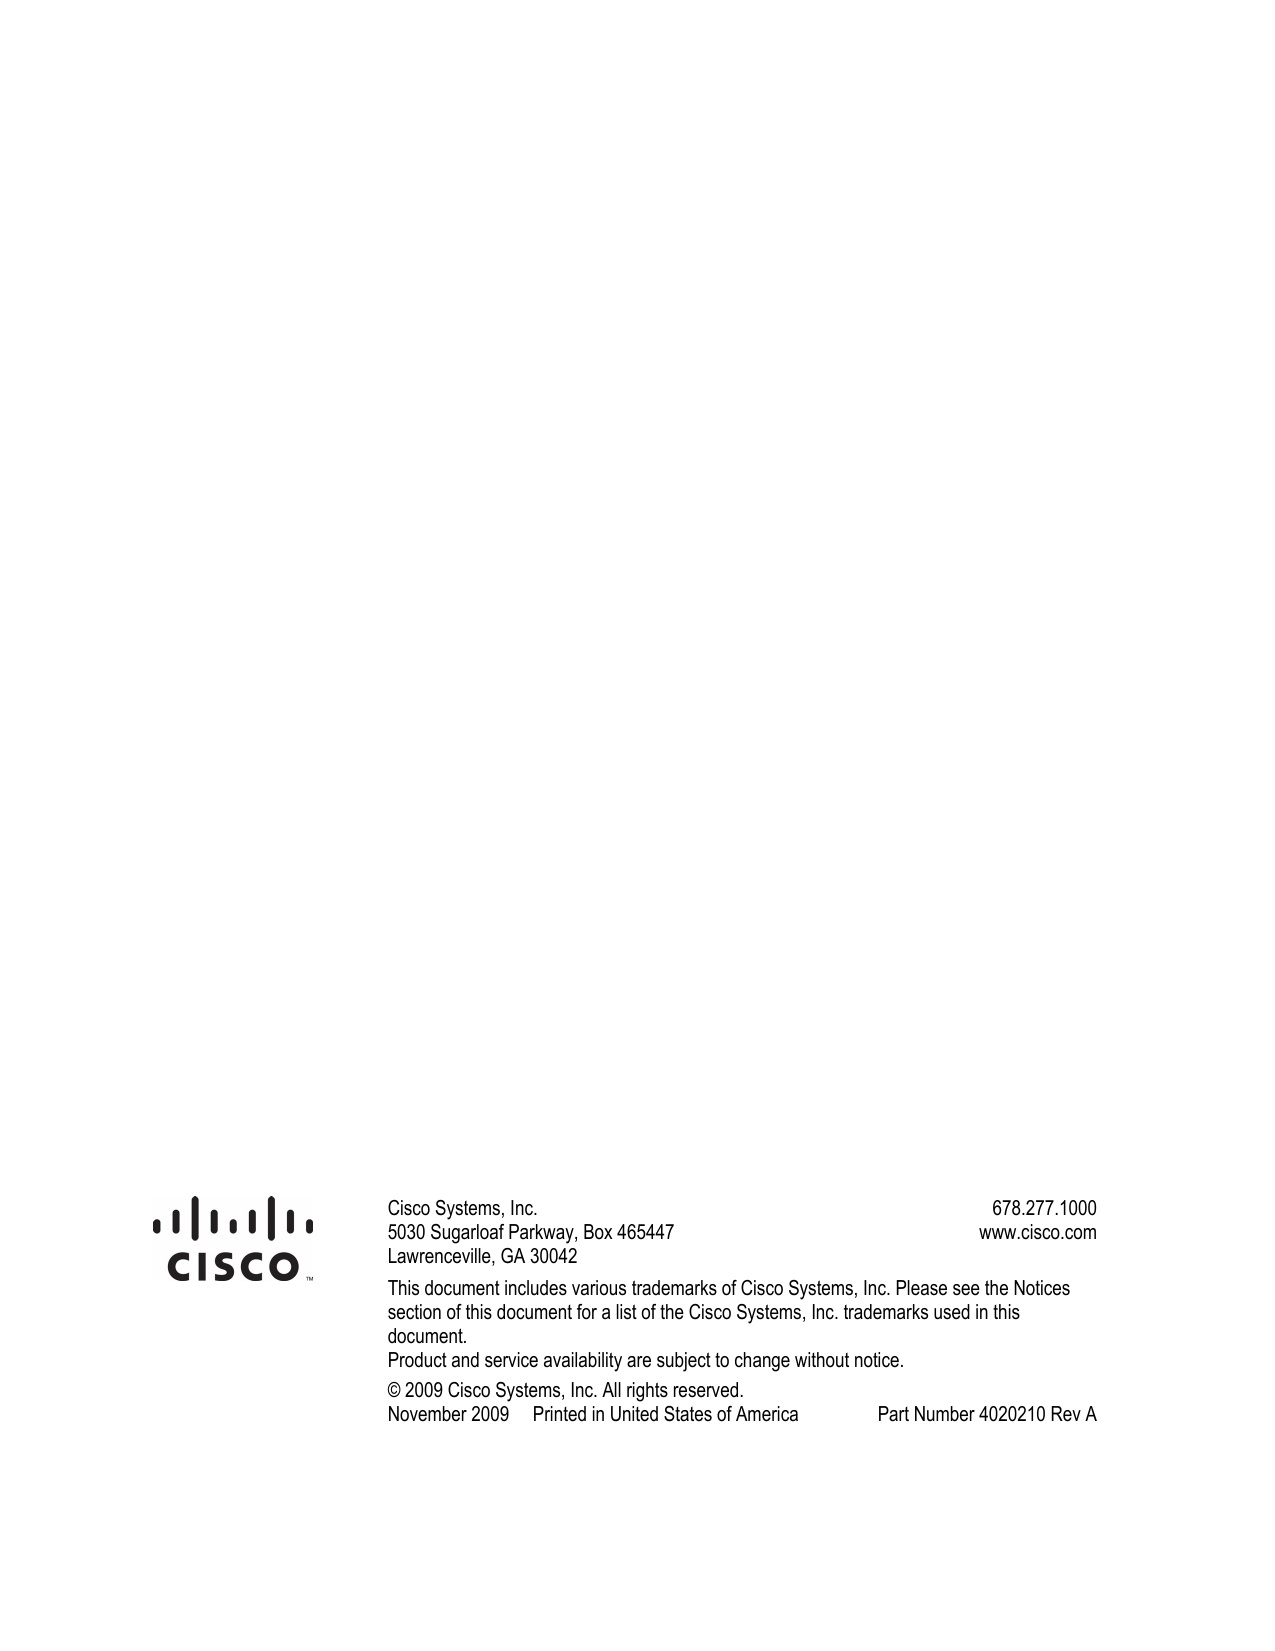                           Cisco Systems, Inc.  5030 Sugarloaf Parkway, Box 465447 Lawrenceville, GA 30042   678.277.1000 www.cisco.com This document includes various trademarks of Cisco Systems, Inc. Please see the Notices section of this document for a list of the Cisco Systems, Inc. trademarks used in this document. Product and service availability are subject to change without notice.  © 2009 Cisco Systems, Inc. All rights reserved. November 2009     Printed in United States of America   Part Number 4020210 Rev A   